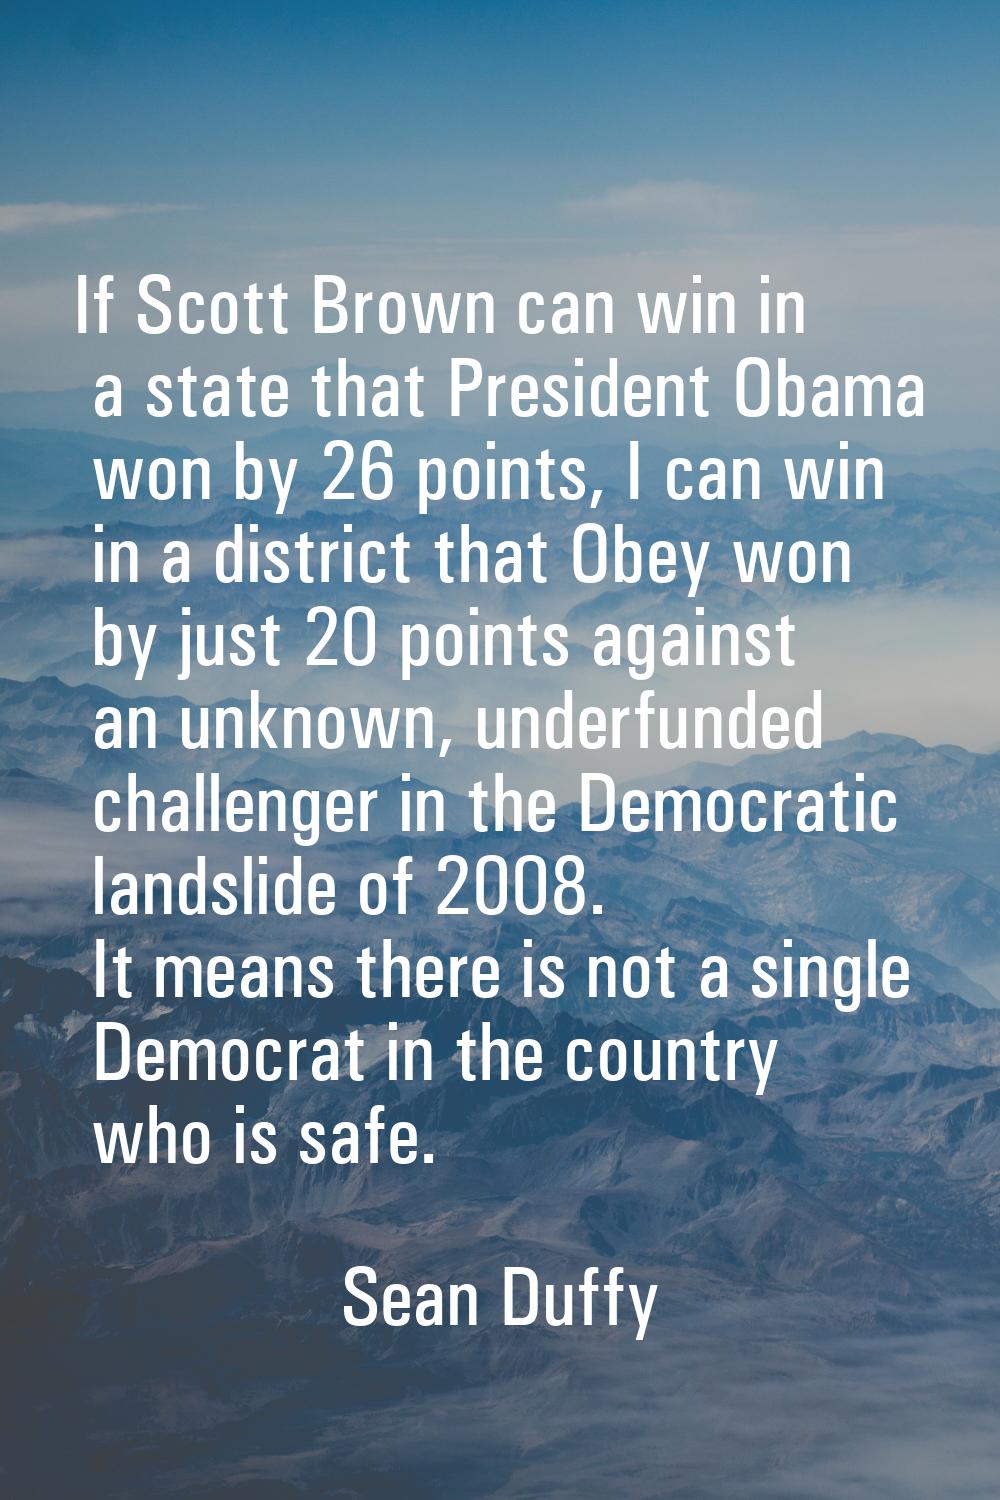 If Scott Brown can win in a state that President Obama won by 26 points, I can win in a district th